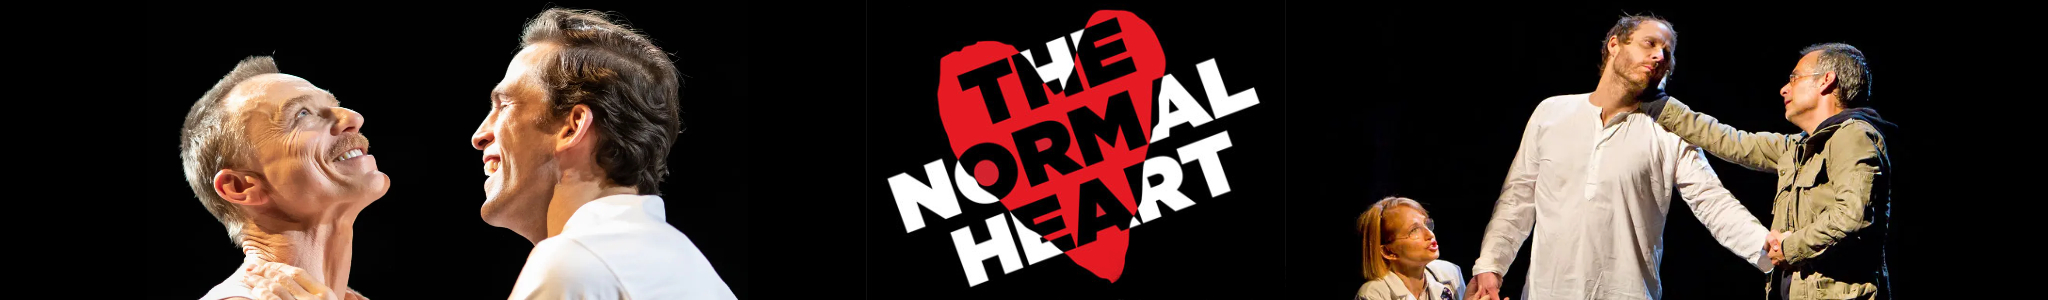 The Normal Heart Broadway Show